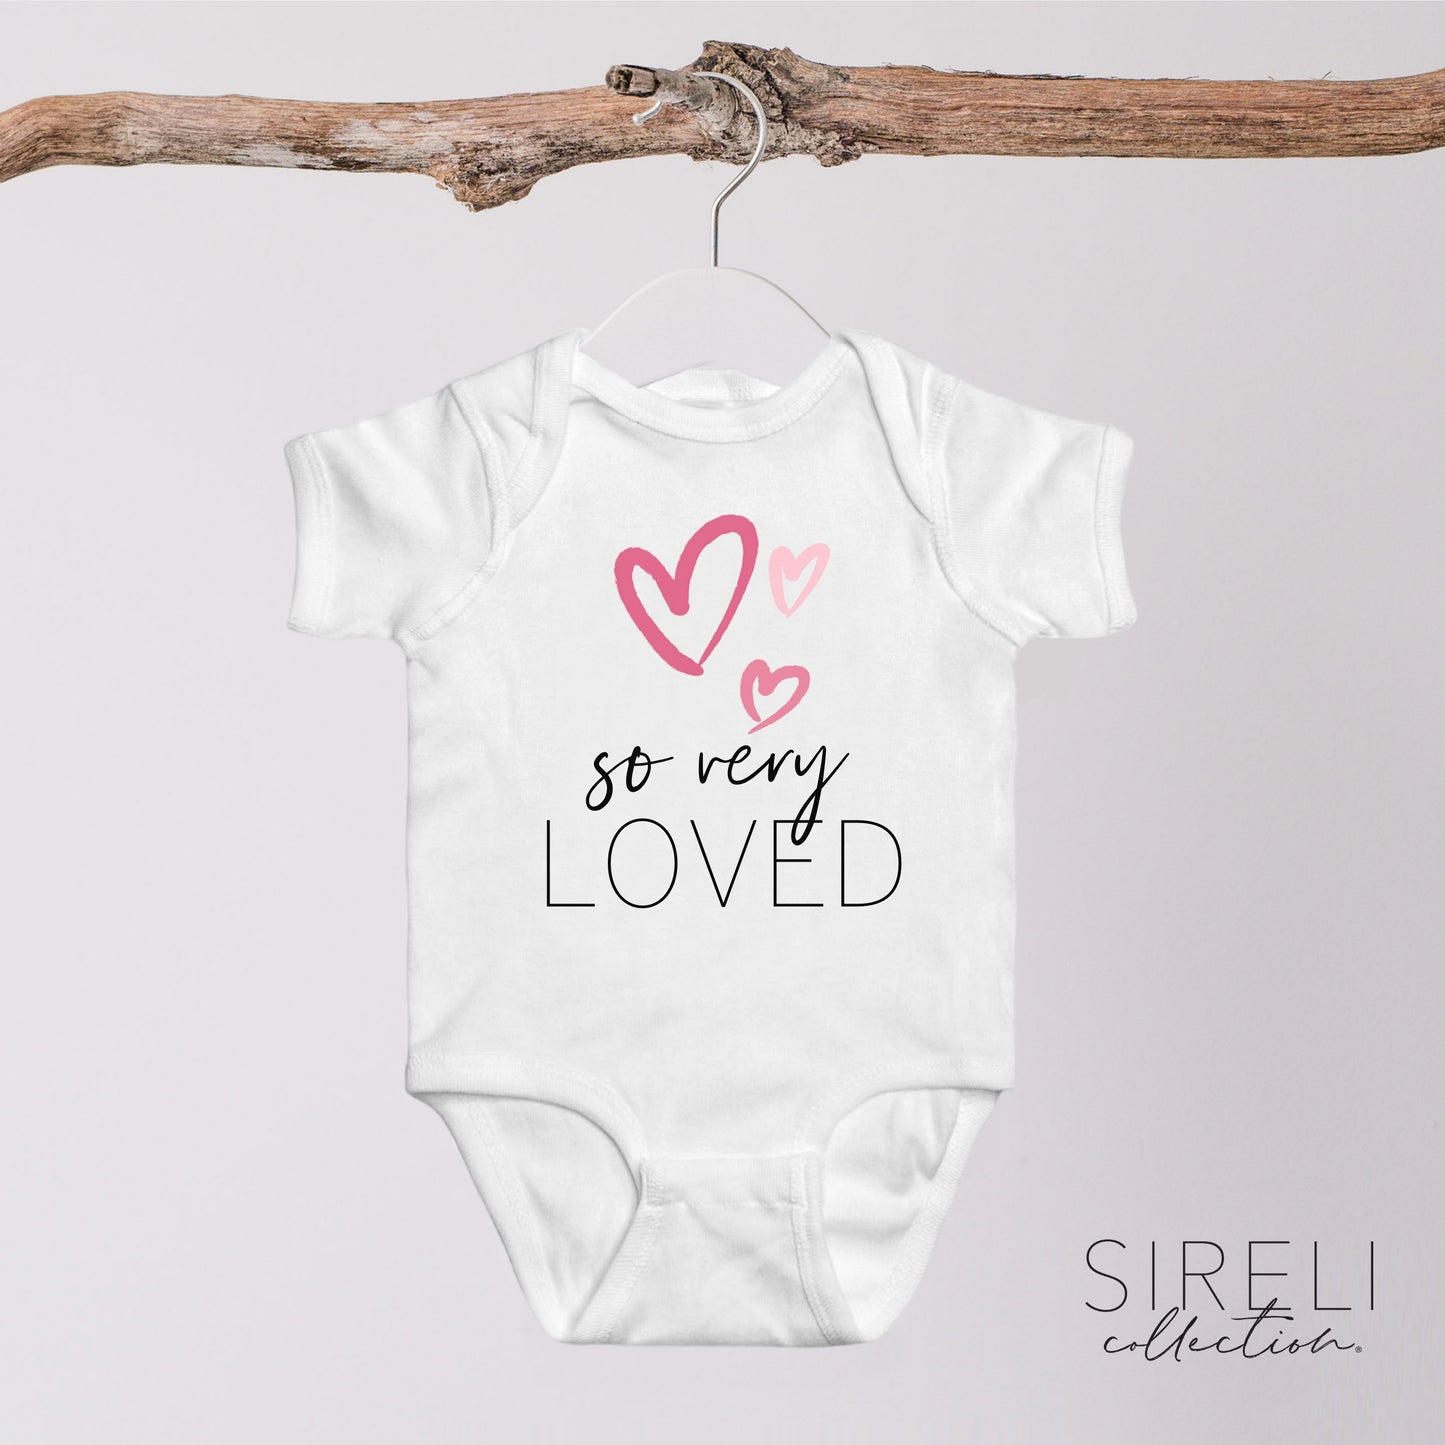 So Very Loved Baby Bodysuit, Baby Announcement, Baby Reveal, Announce Pregnancy, Pregnancy Reveal Husband Grandparents, Valentine's Day